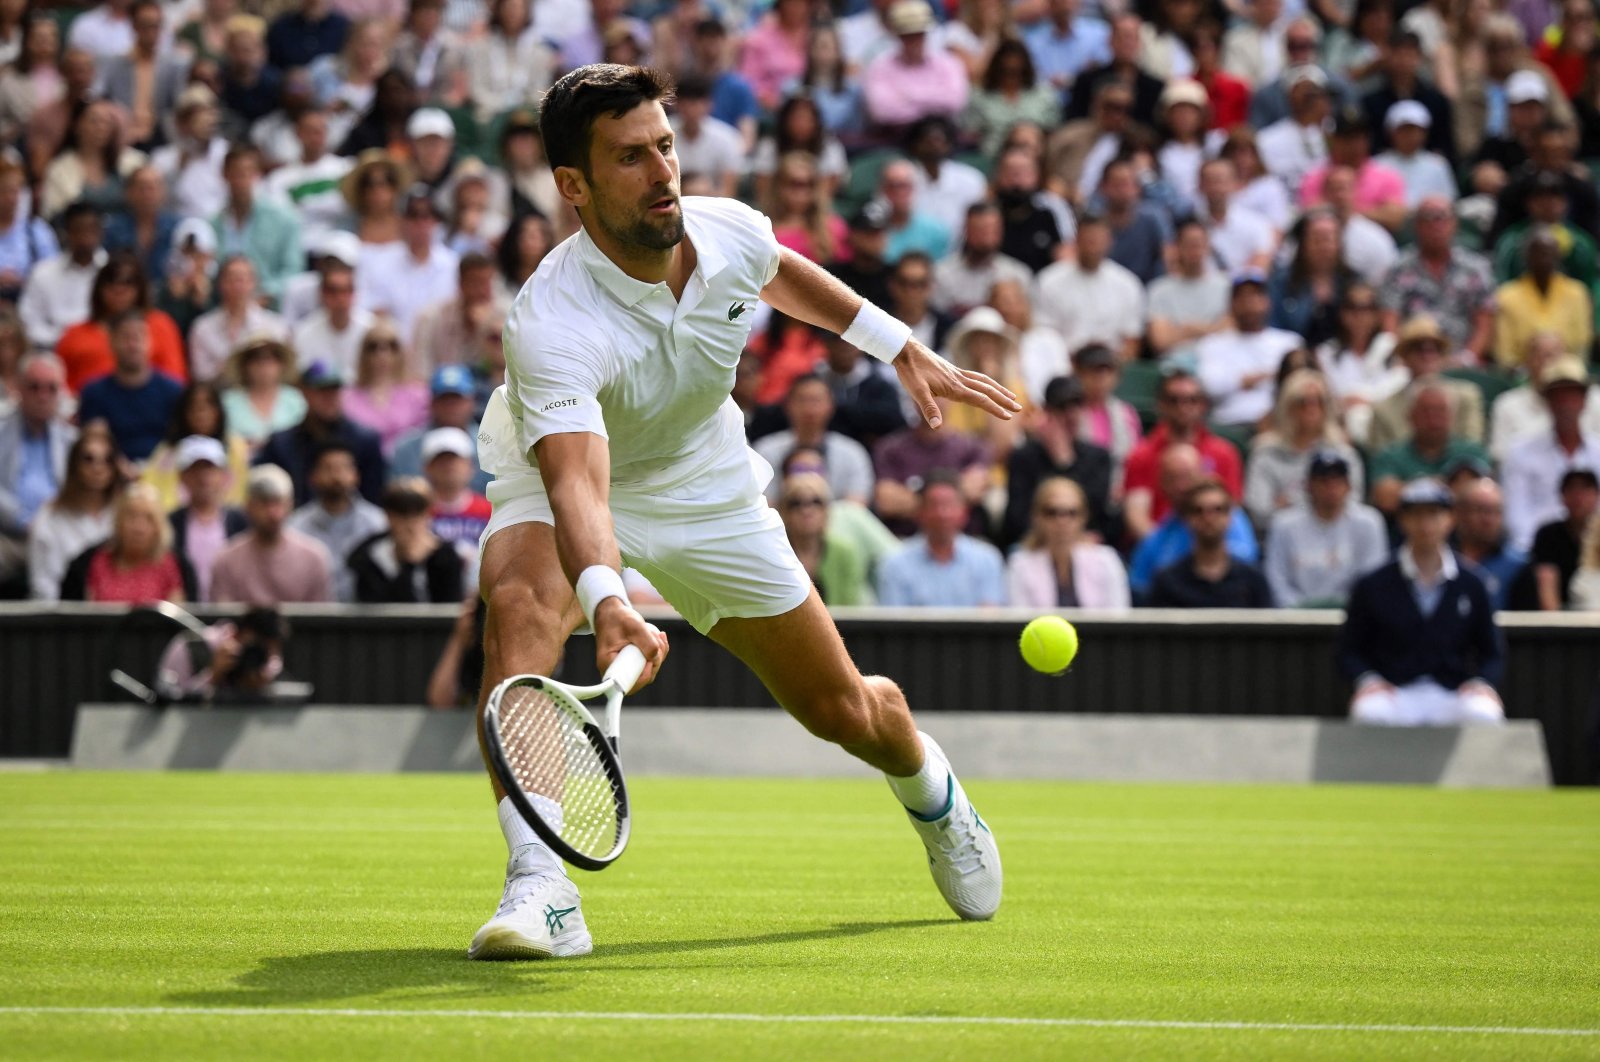 Serbia&#039;s Novak Djokovic returns the ball to Argentina&#039;s Pedro Cachin during their men&#039;s singles tennis match on the first day of the 2023 Wimbledon Championships at The All England Tennis Club in Wimbledon, London, UK., July 3, 2023. (AFP Photo)